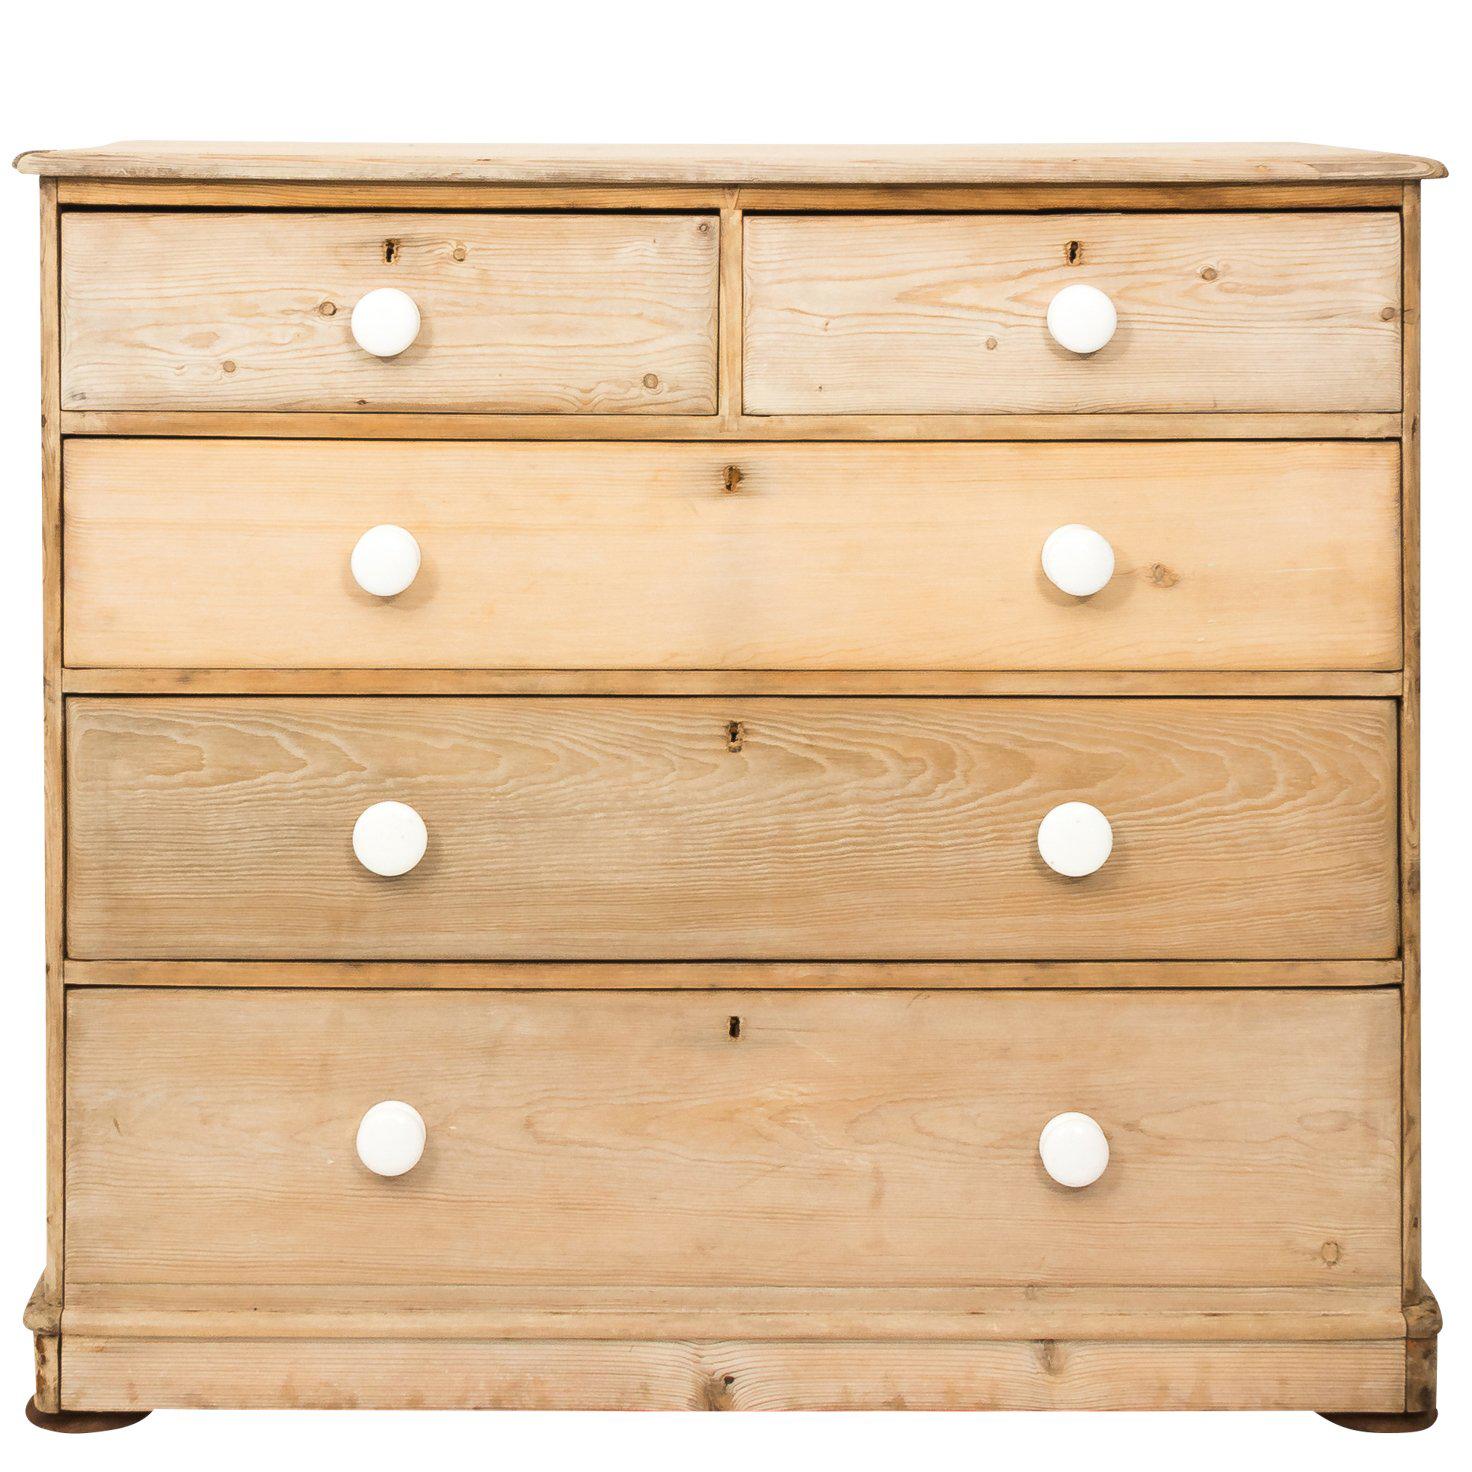 Bleached Pine Chest of Drawers